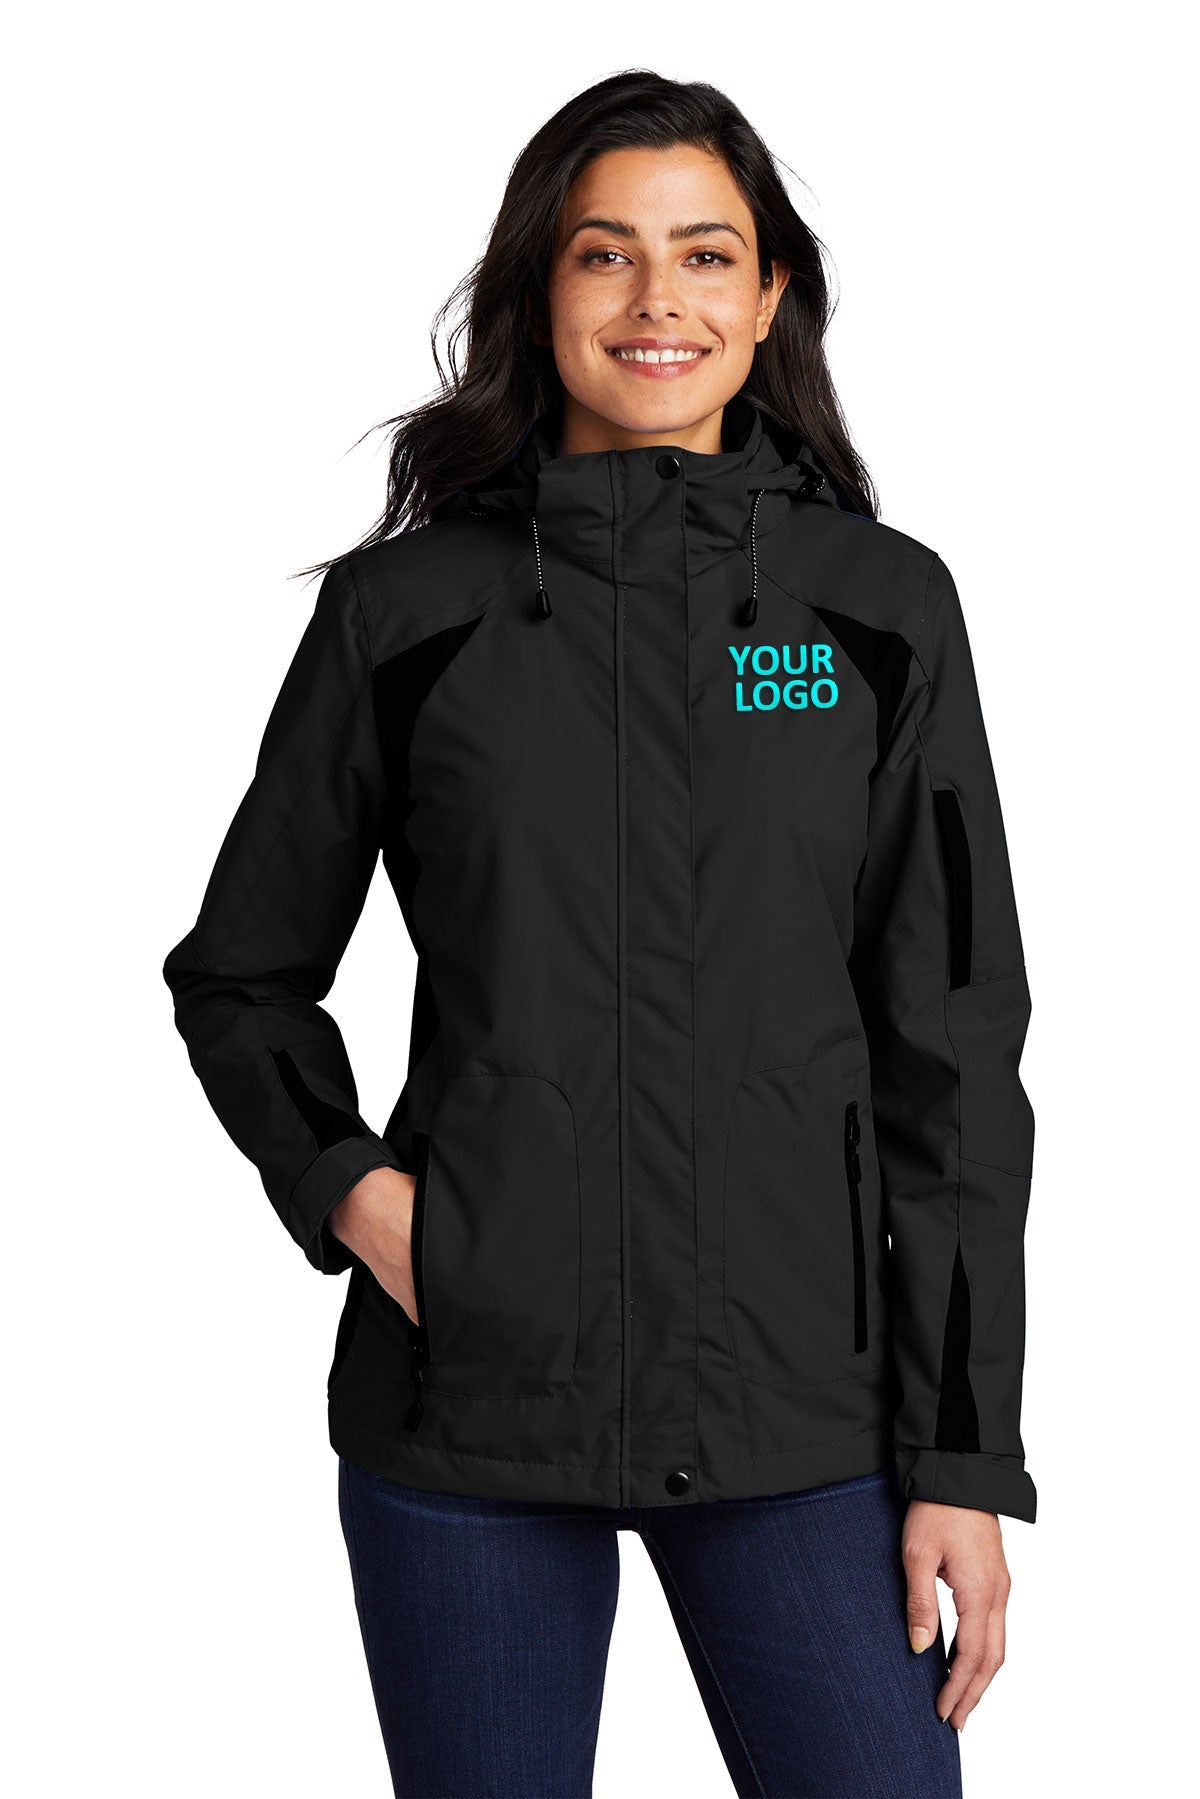 Port Authority Black/ Black L304 business jackets with logo